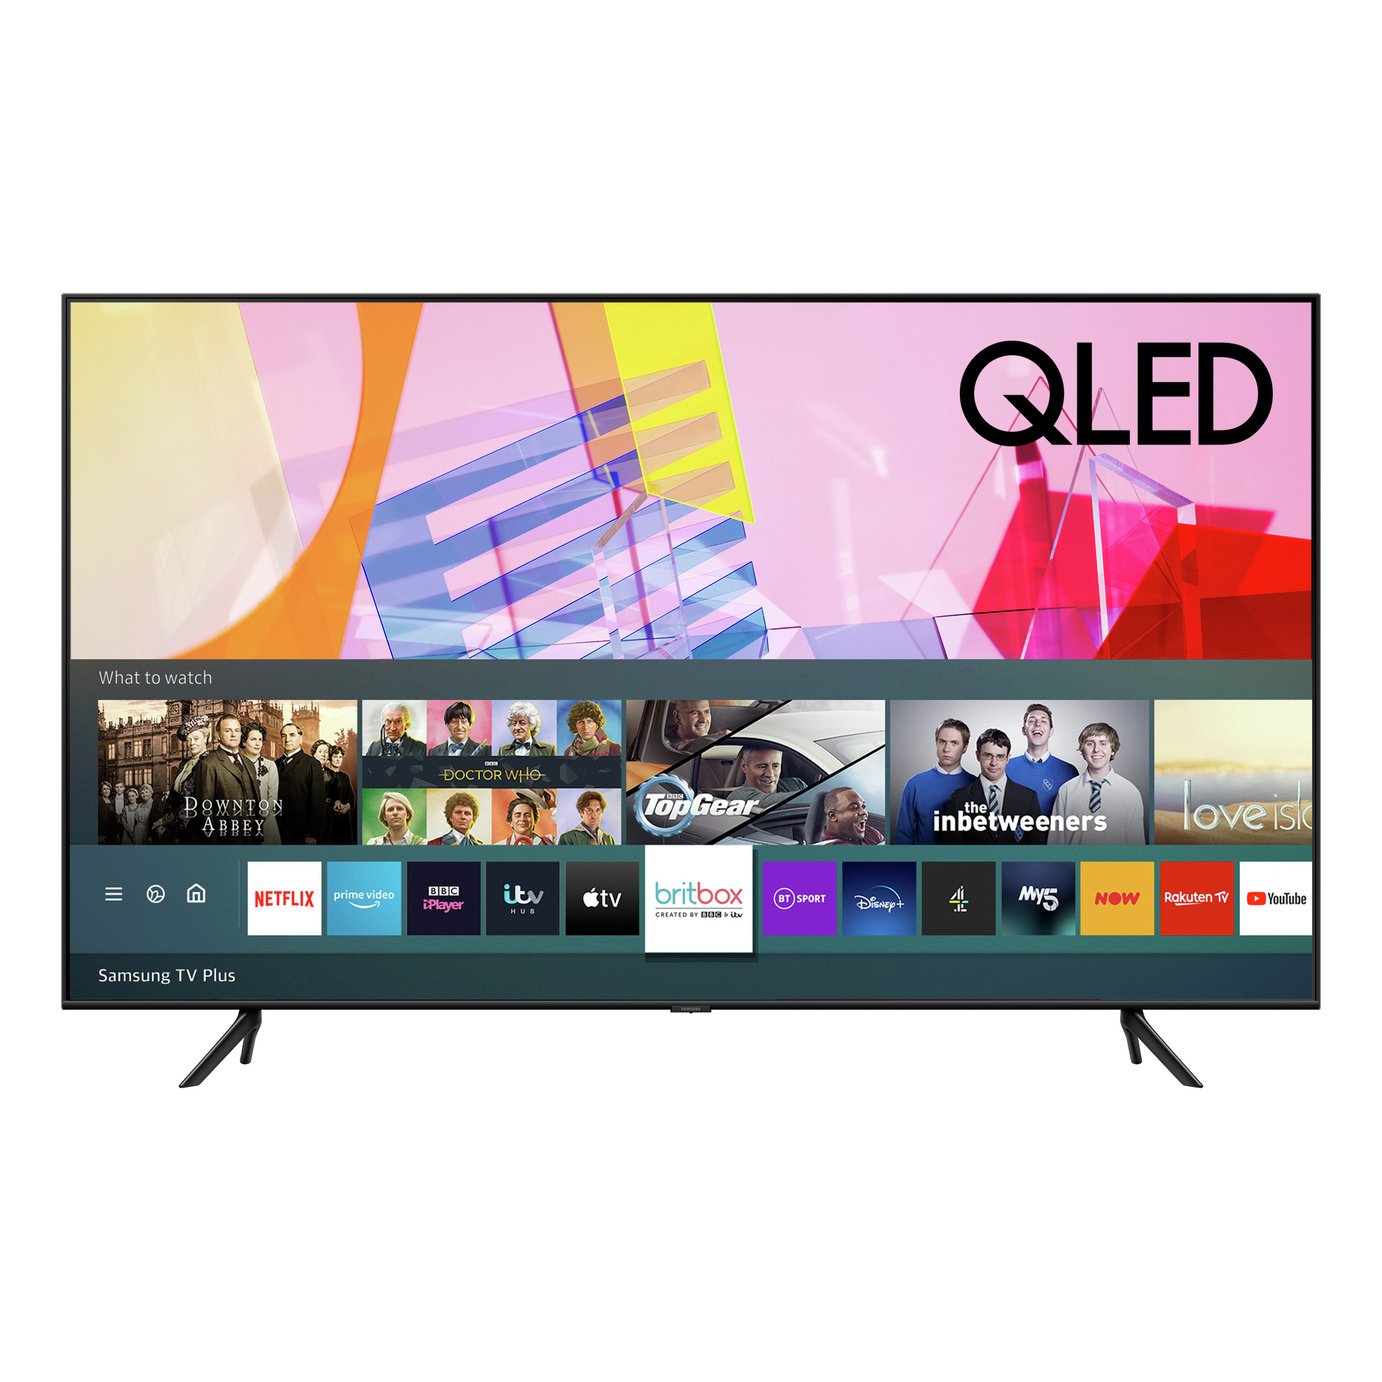 Samsung 85 Inch QE85Q60T Smart Ultra HD QLED TV with HDR Review